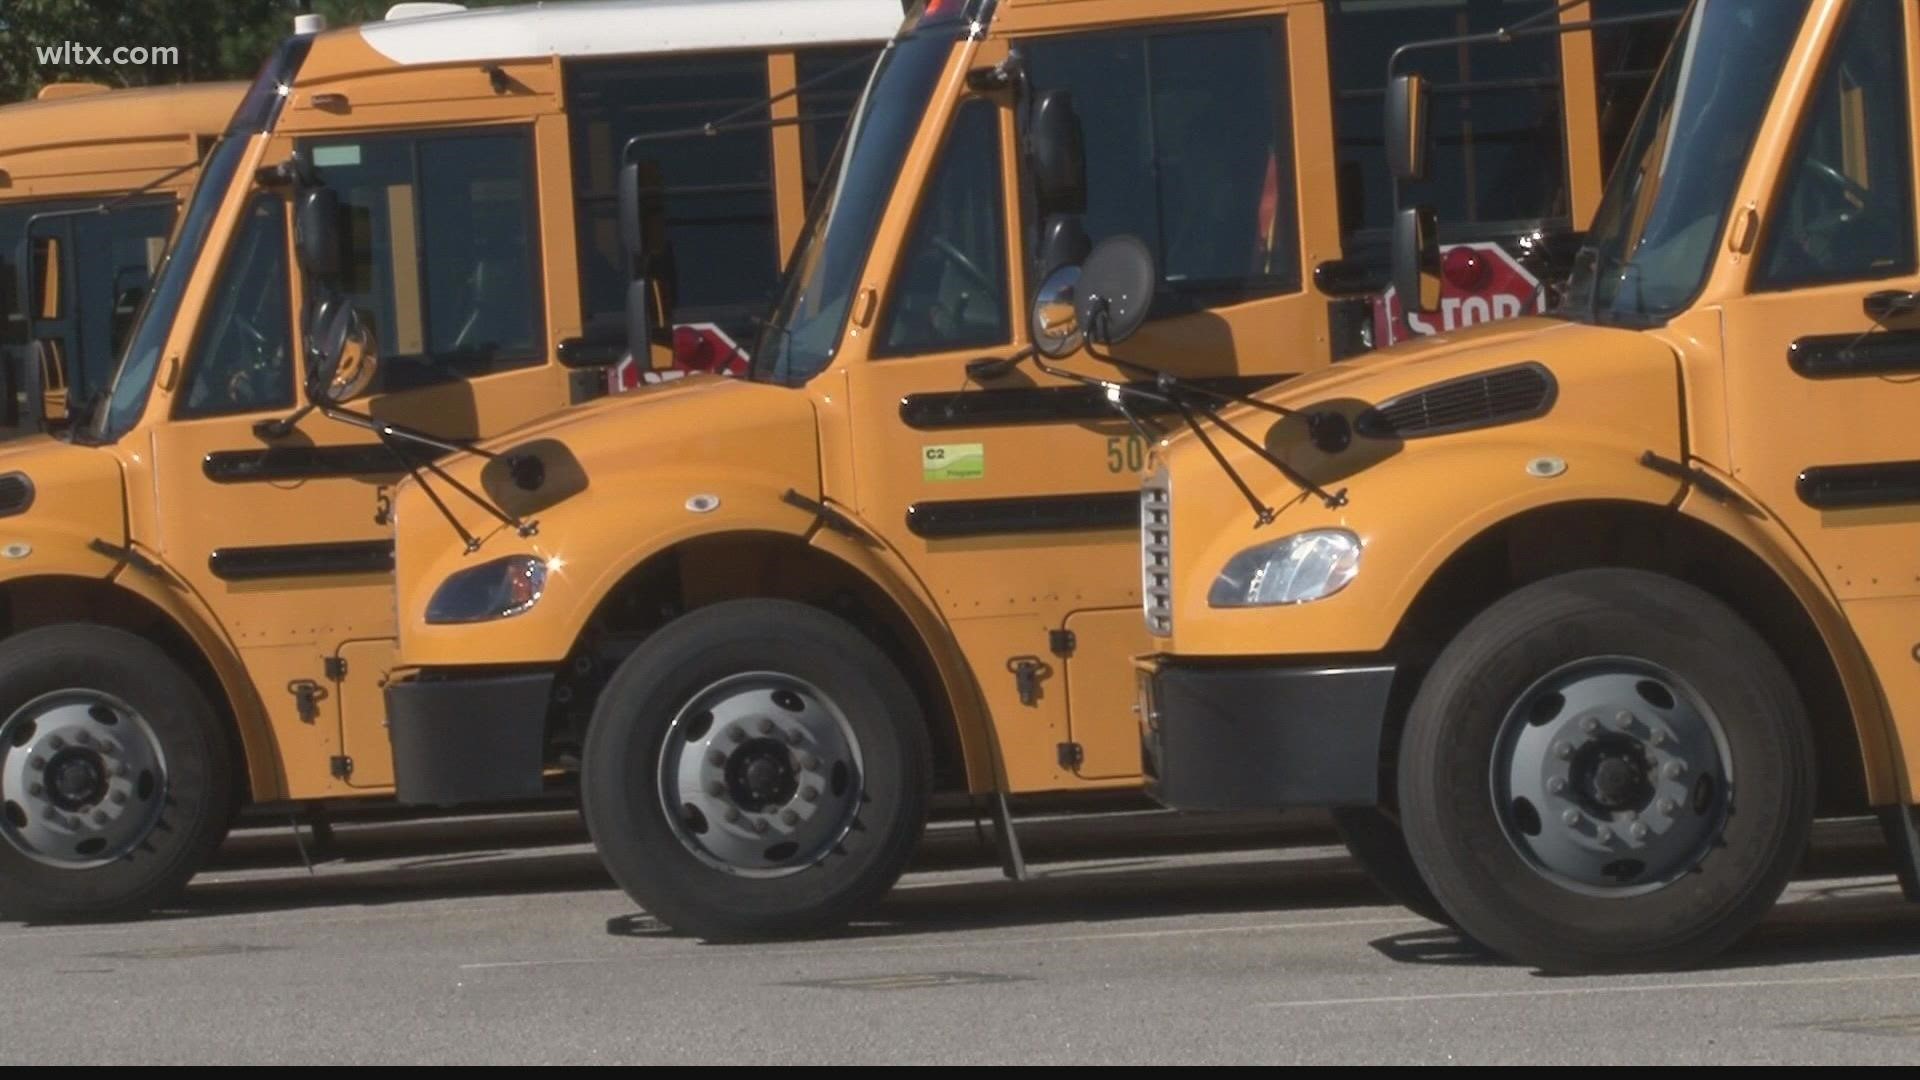 The South Carolina Department of Education announced Monday that masks are no longer required on state-owned buses.